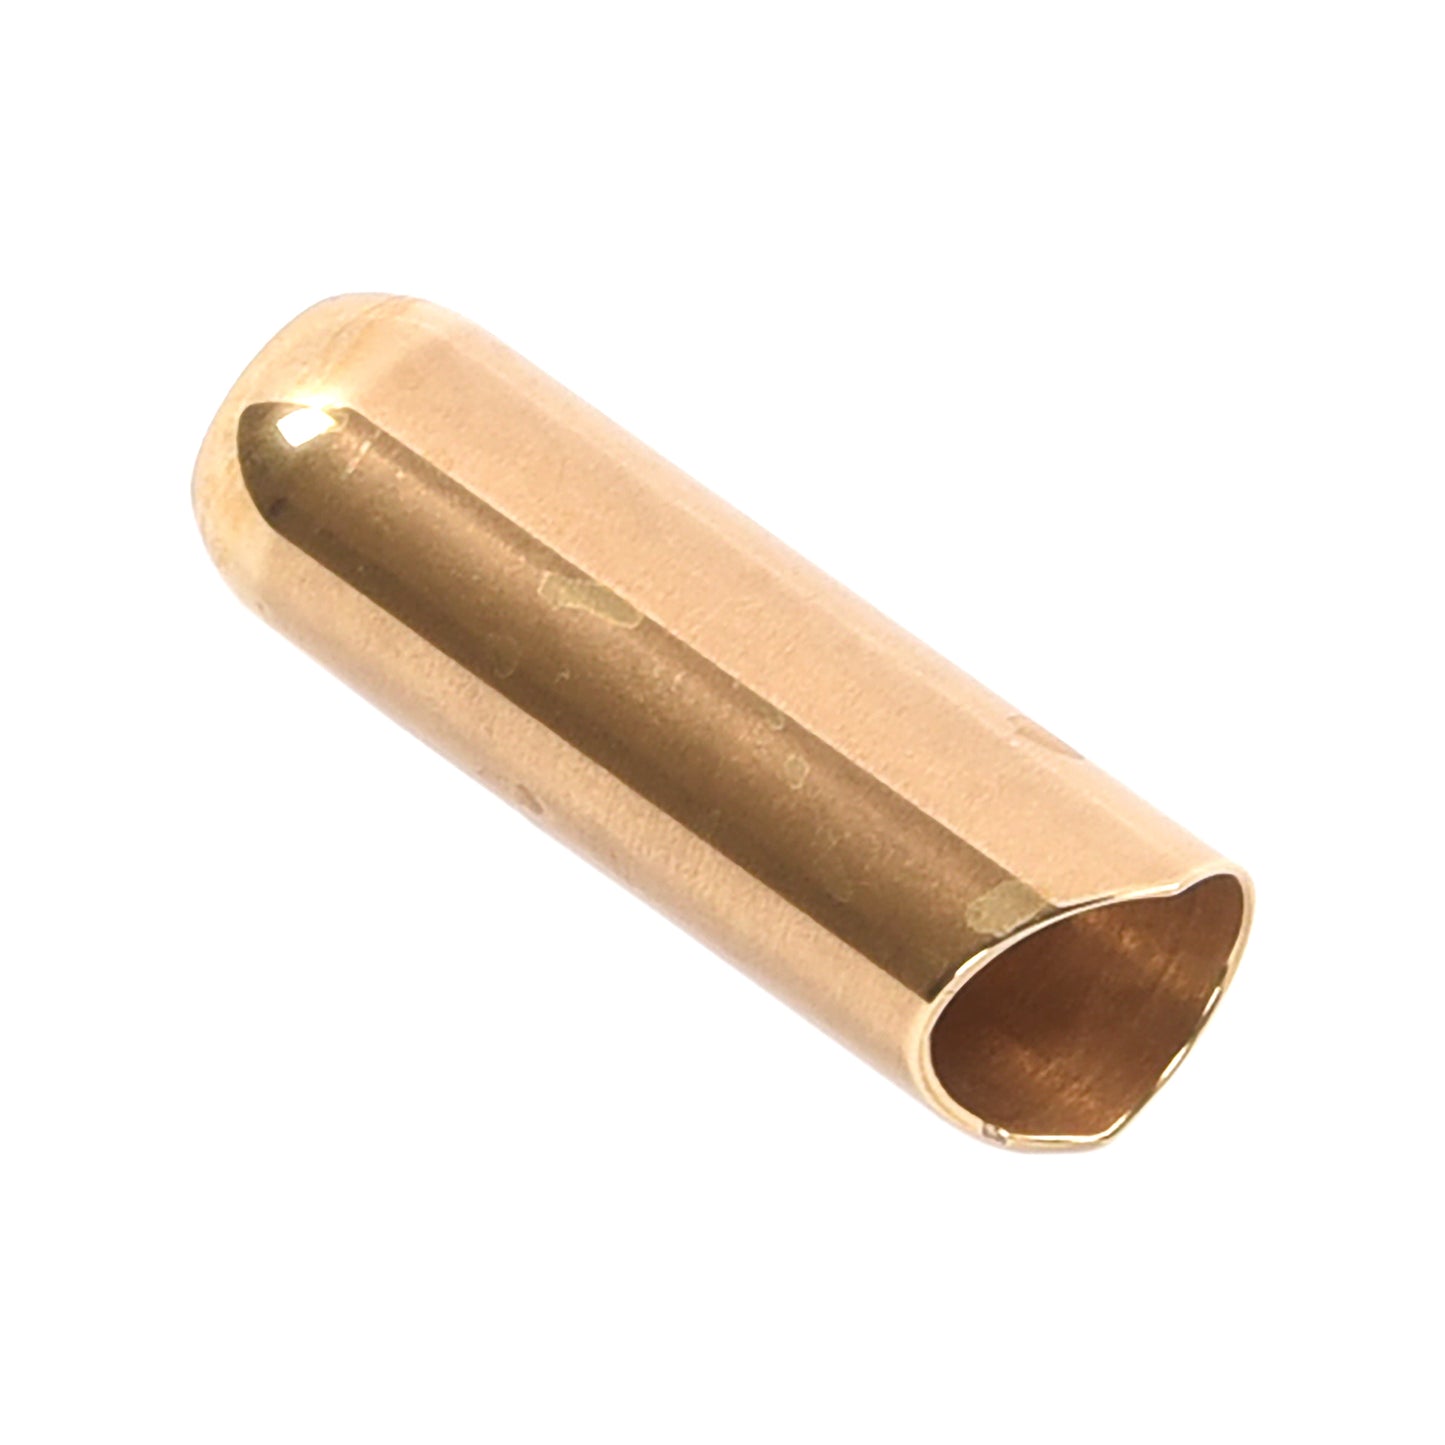 The Rock Slide Minnie Marks Signature Extra Small 15.5mm Internal Diameter x 52mm Length Polished Brass